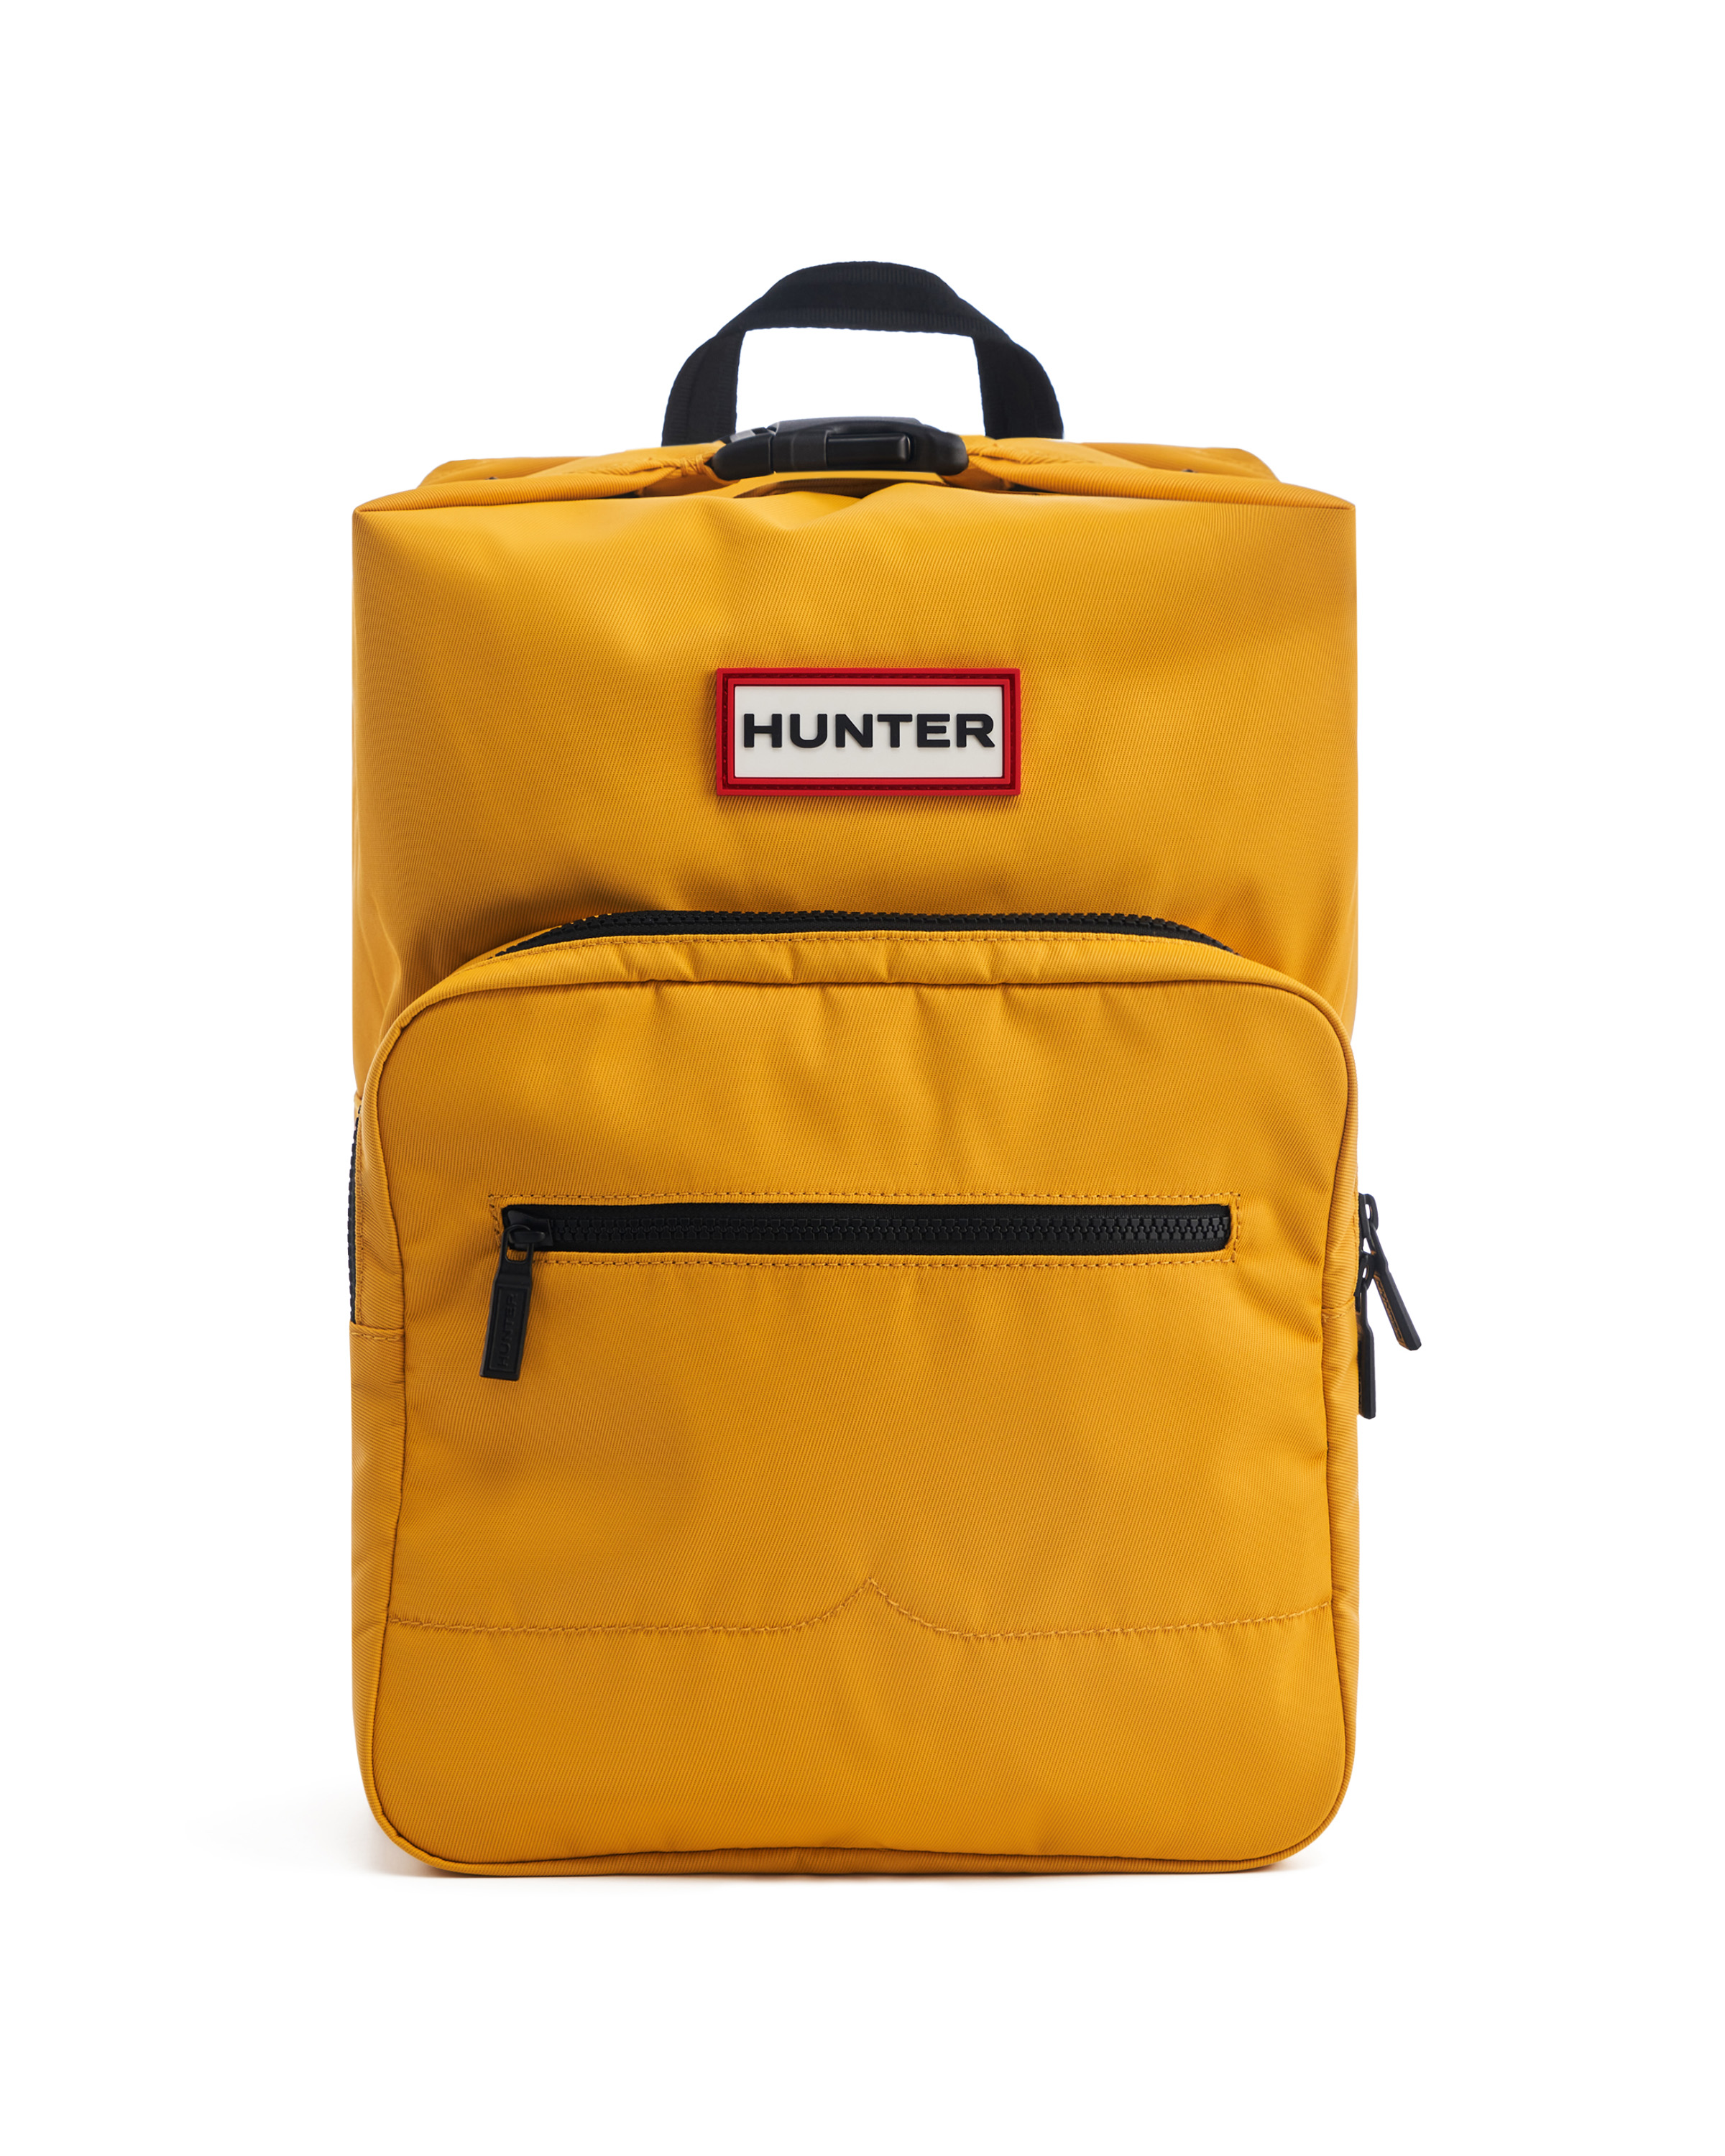 NYLON PIONEER LARGE TOPCLIP BACKPACK-Hunter Boots Singapore